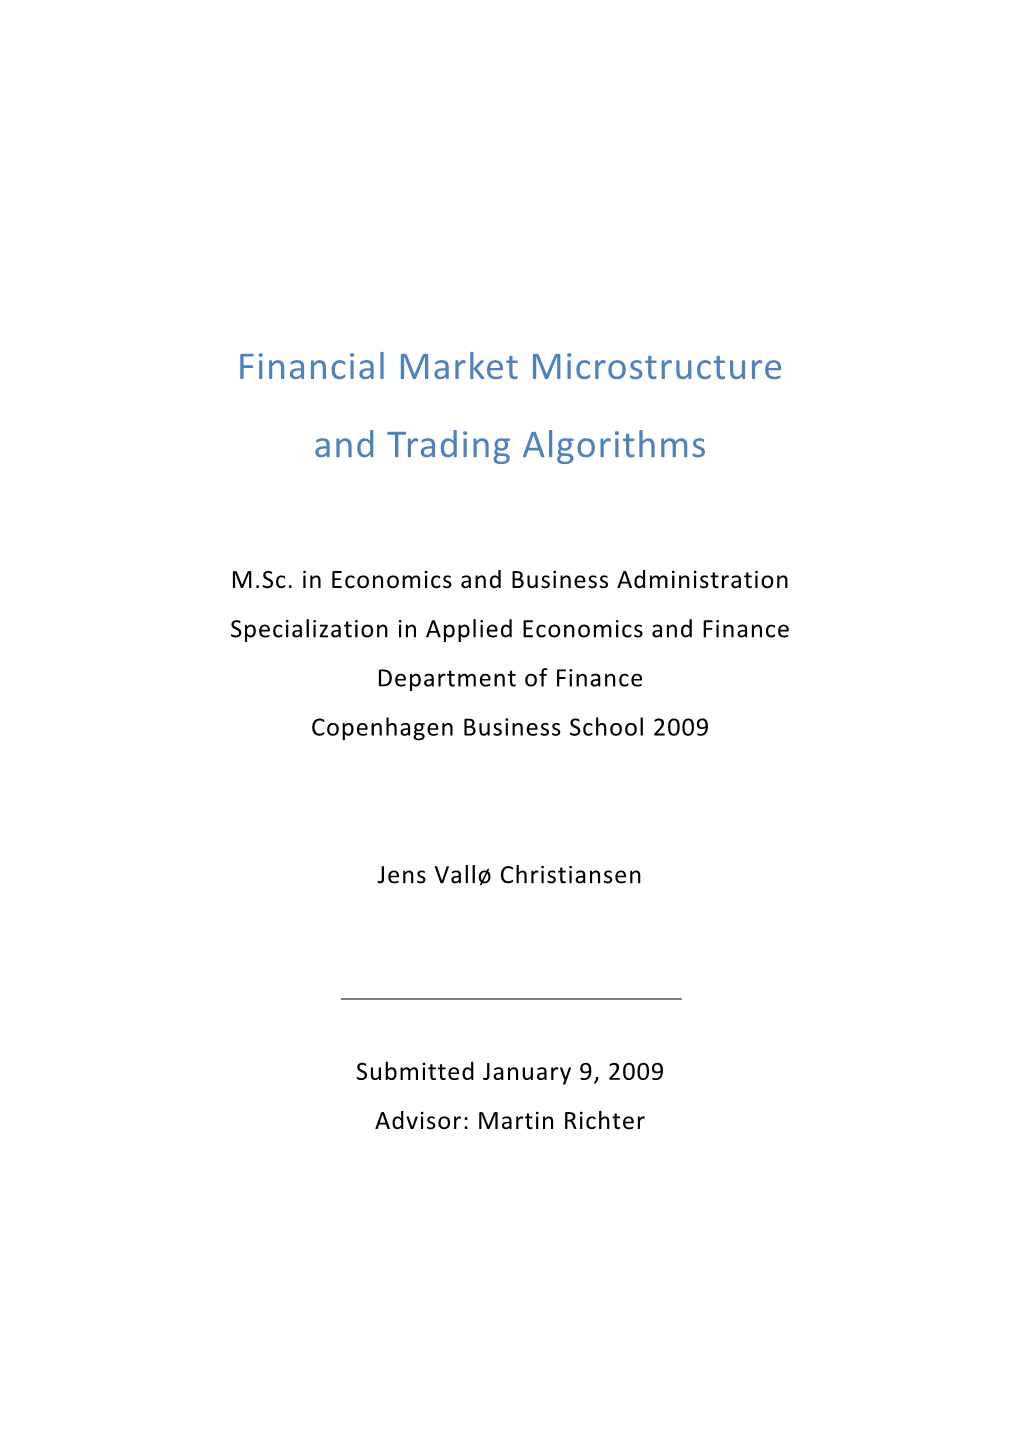 Financial Market Microstructure and Trading Algorithms